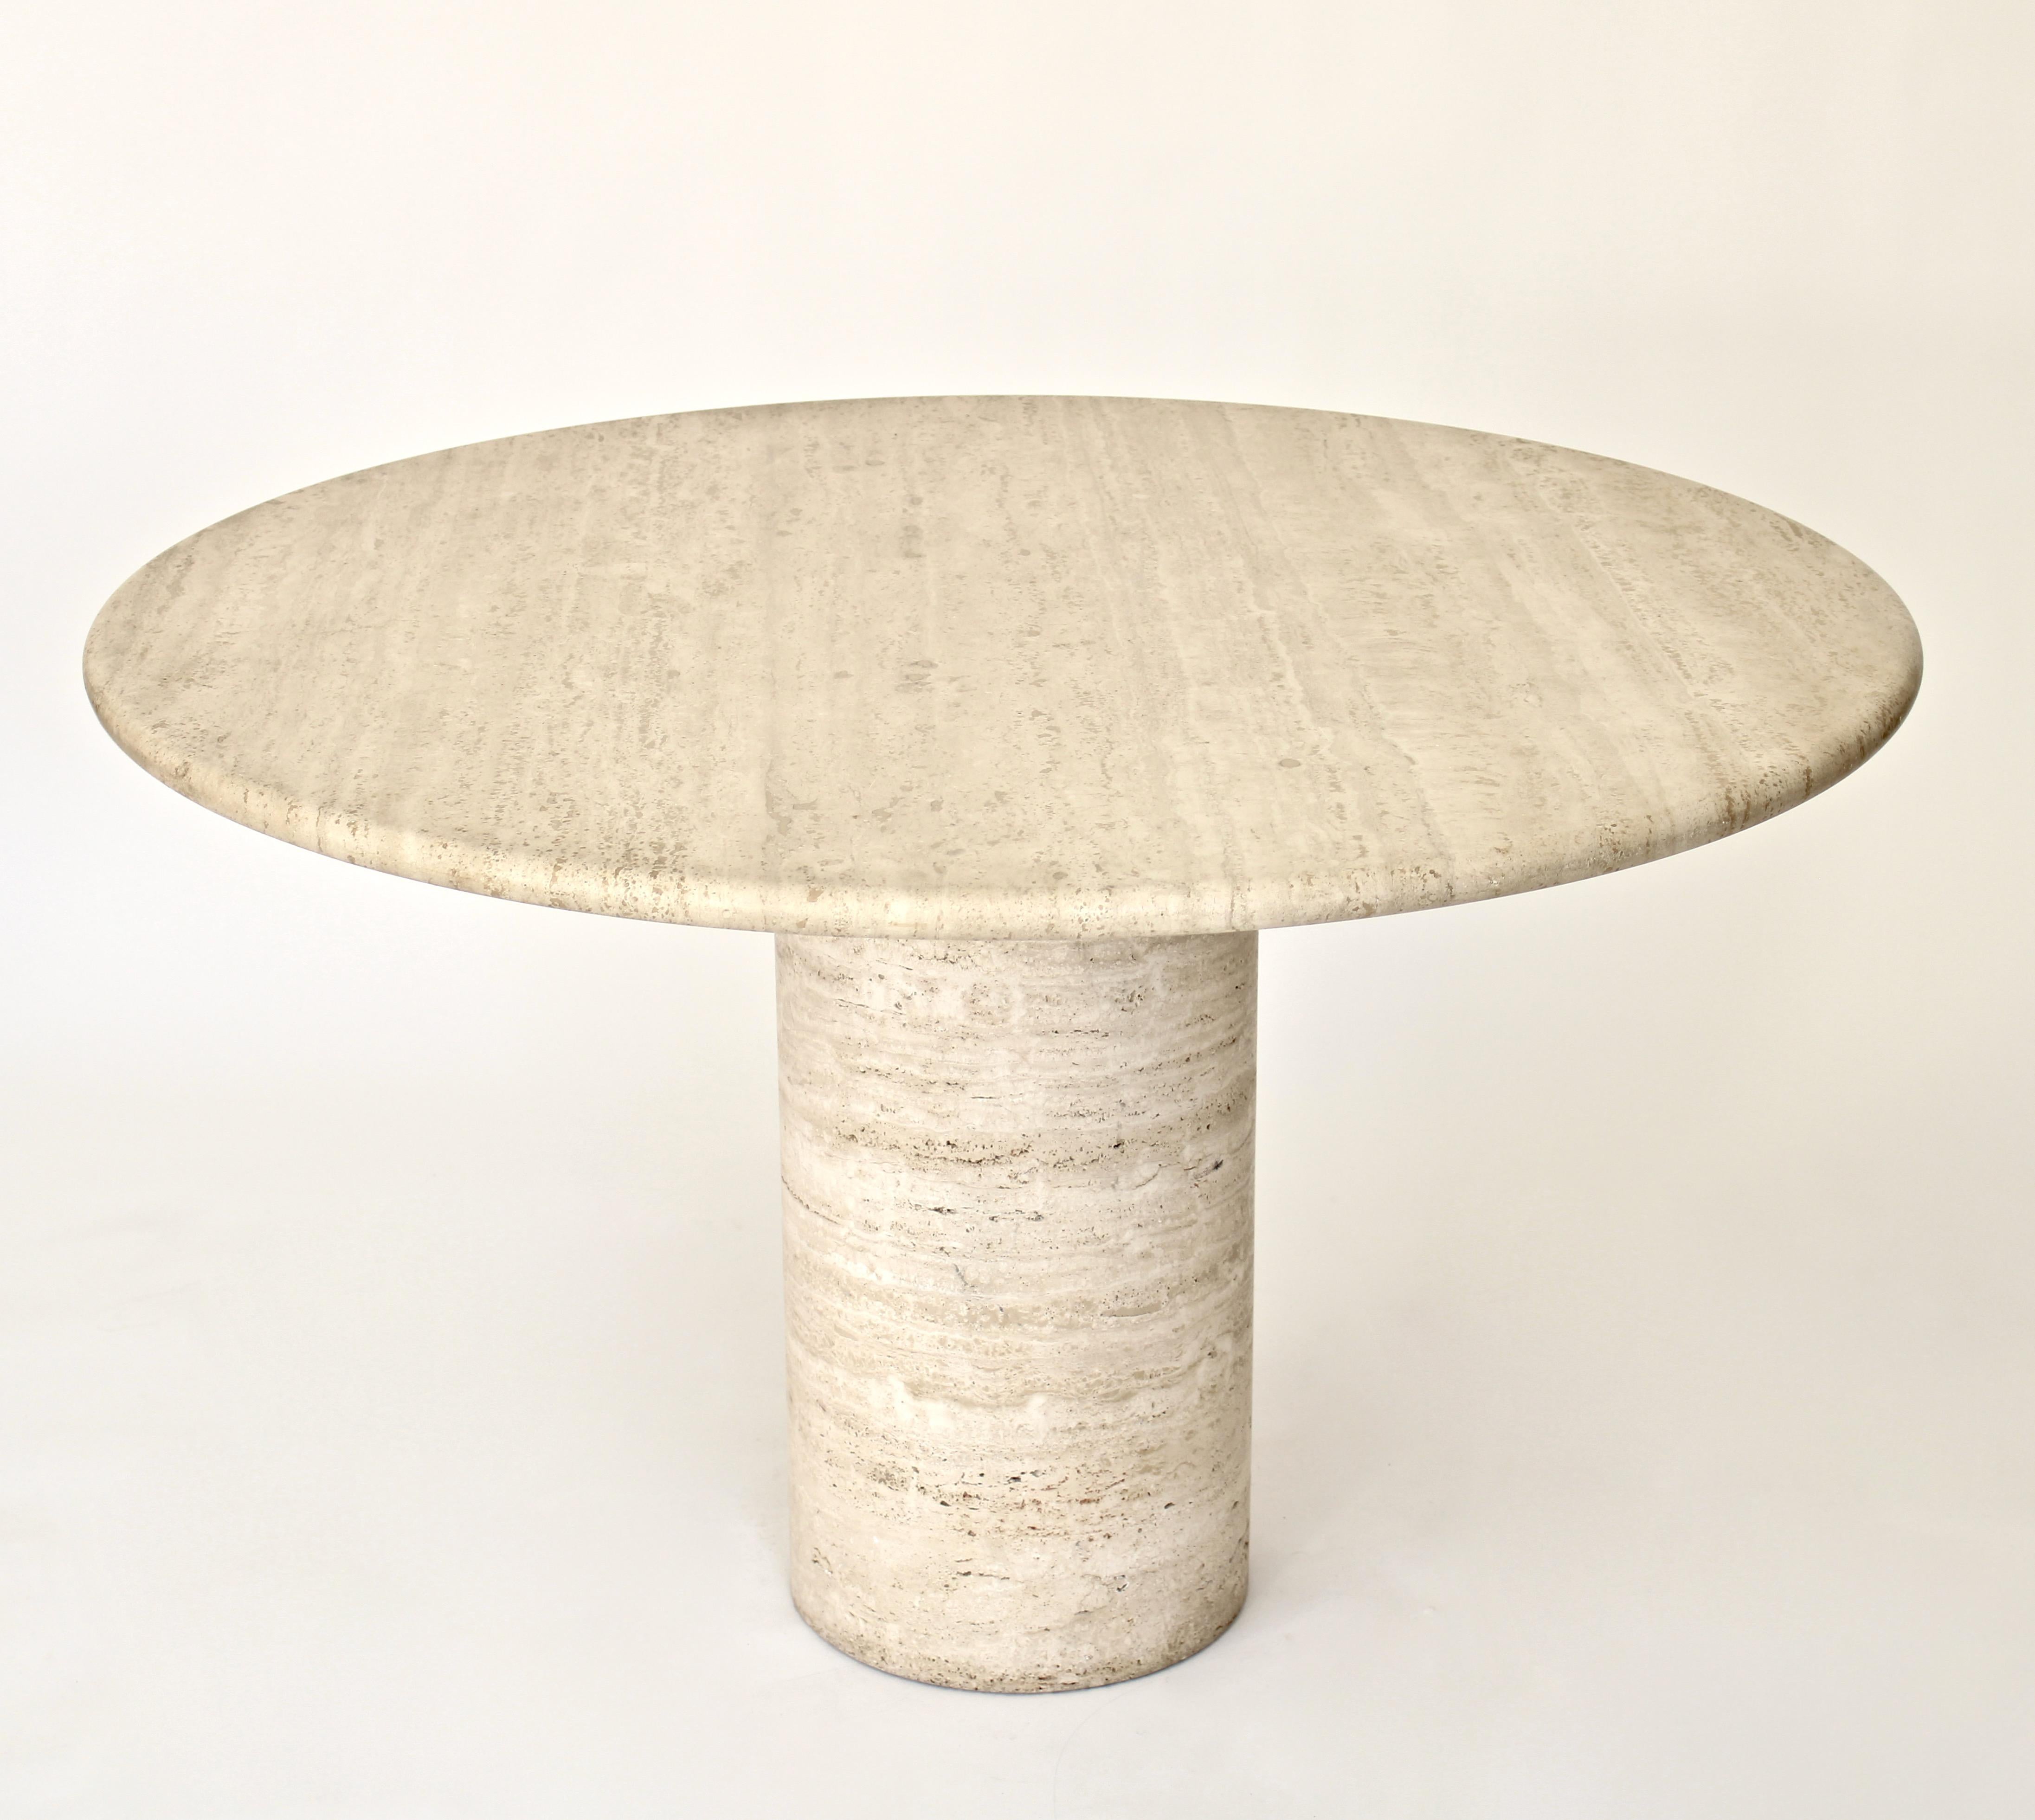 Italian round top cream travertine dining or center table on a round column base.
Variegated tones of cream and beige travertine marble, Italy, circa 1970. The top is honed and not shiny. 
There are no chips or cracks or restorations. 
Overall size: